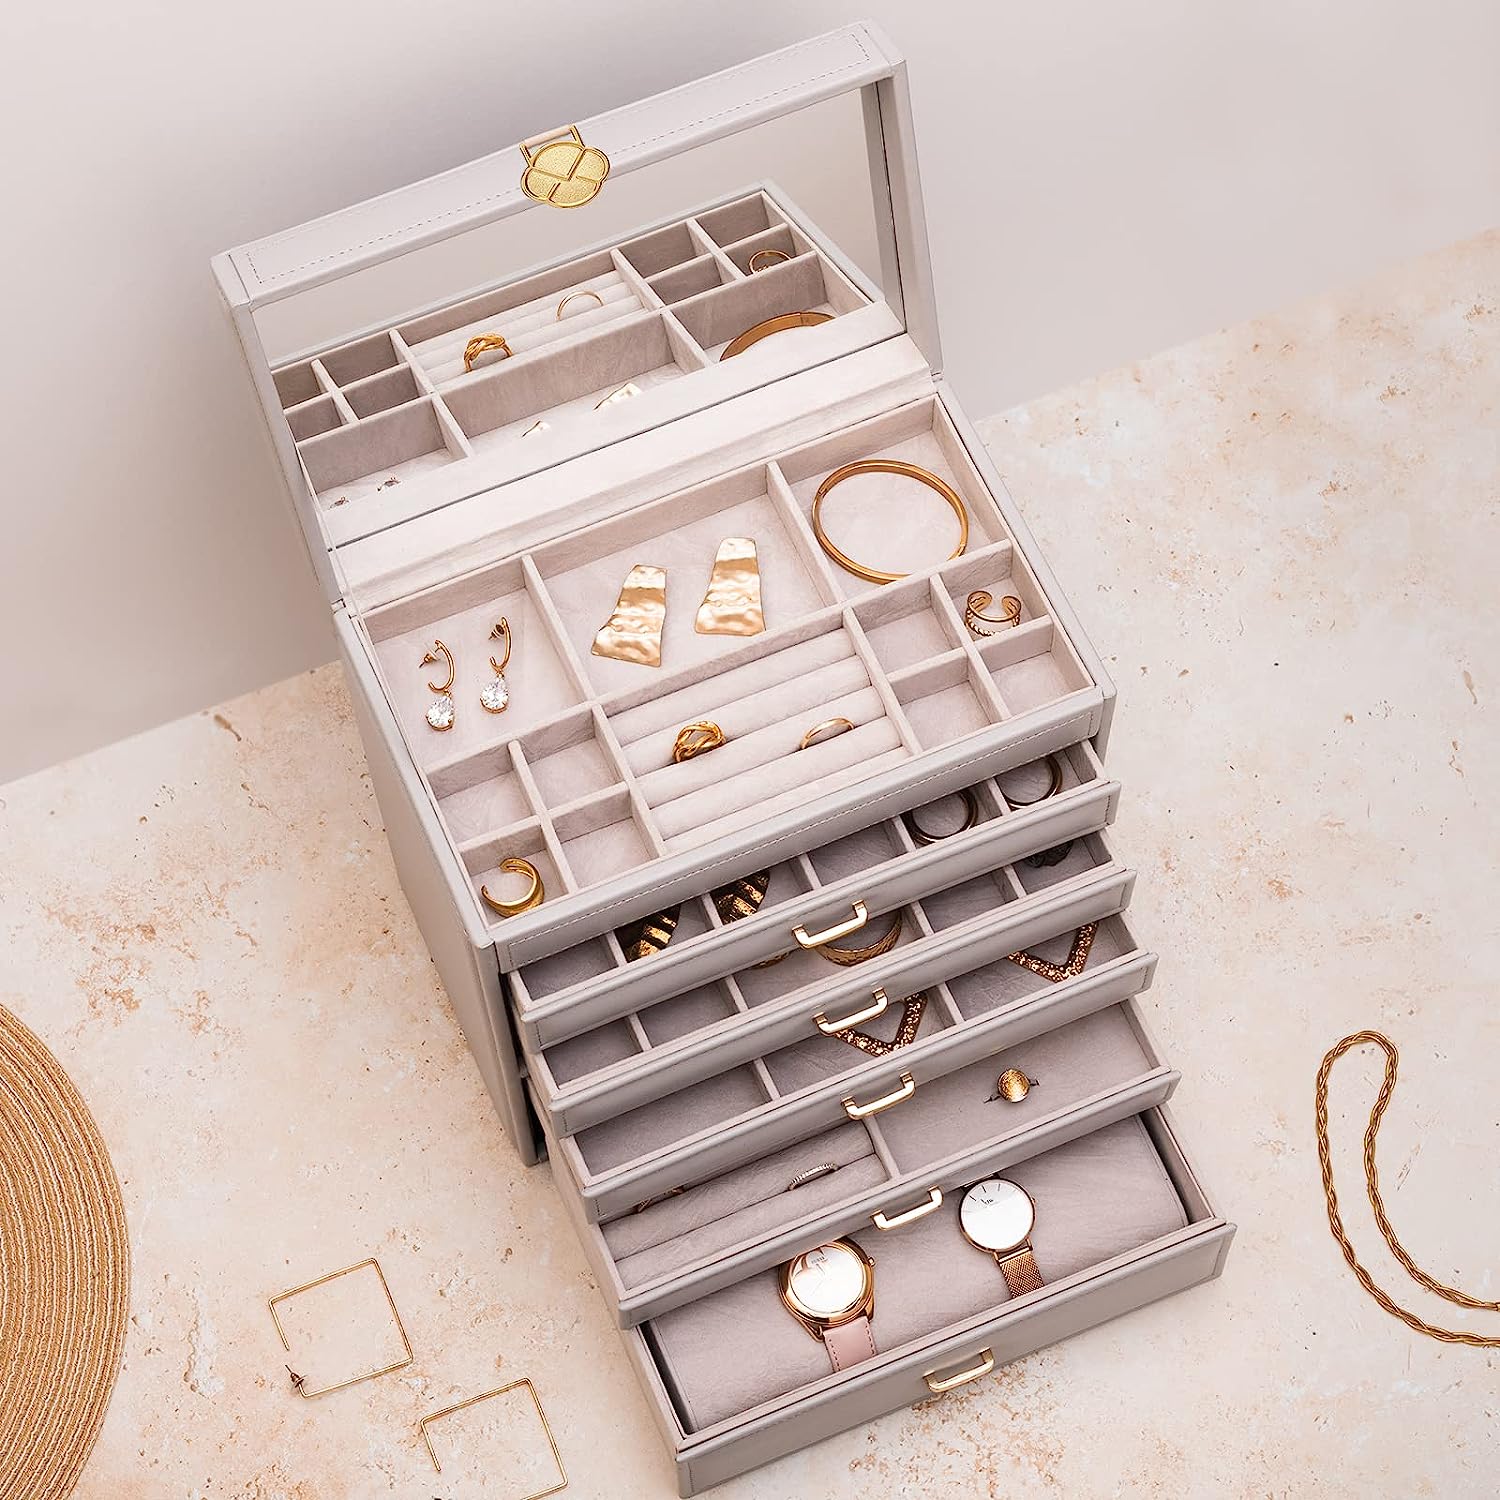 Where To Buy Jewelry Boxes